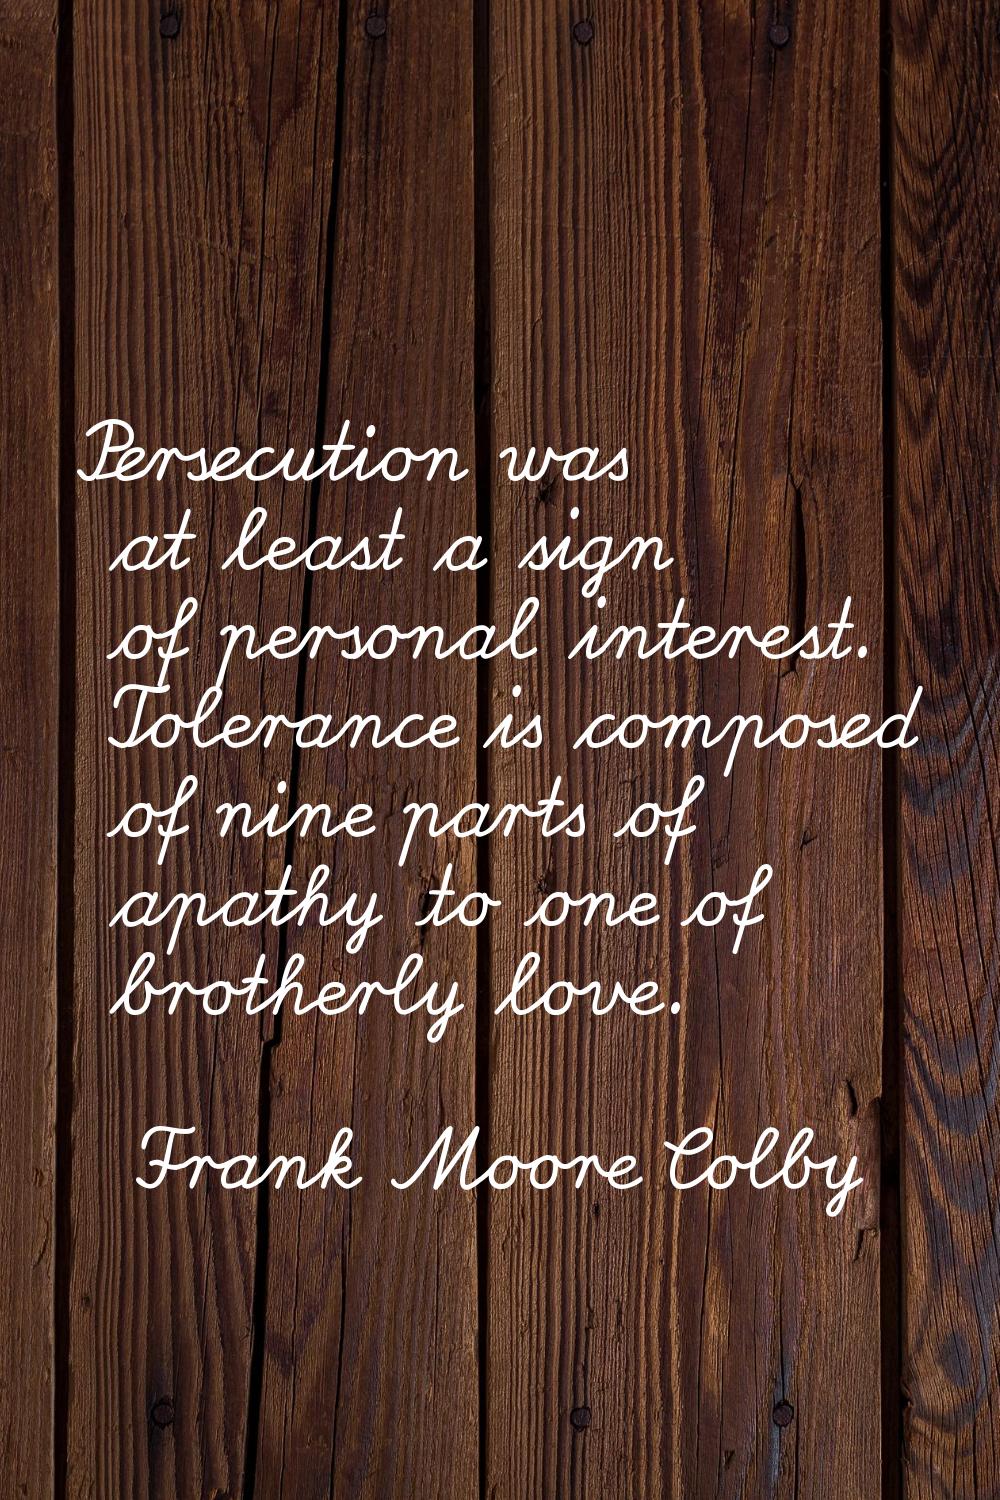 Persecution was at least a sign of personal interest. Tolerance is composed of nine parts of apathy